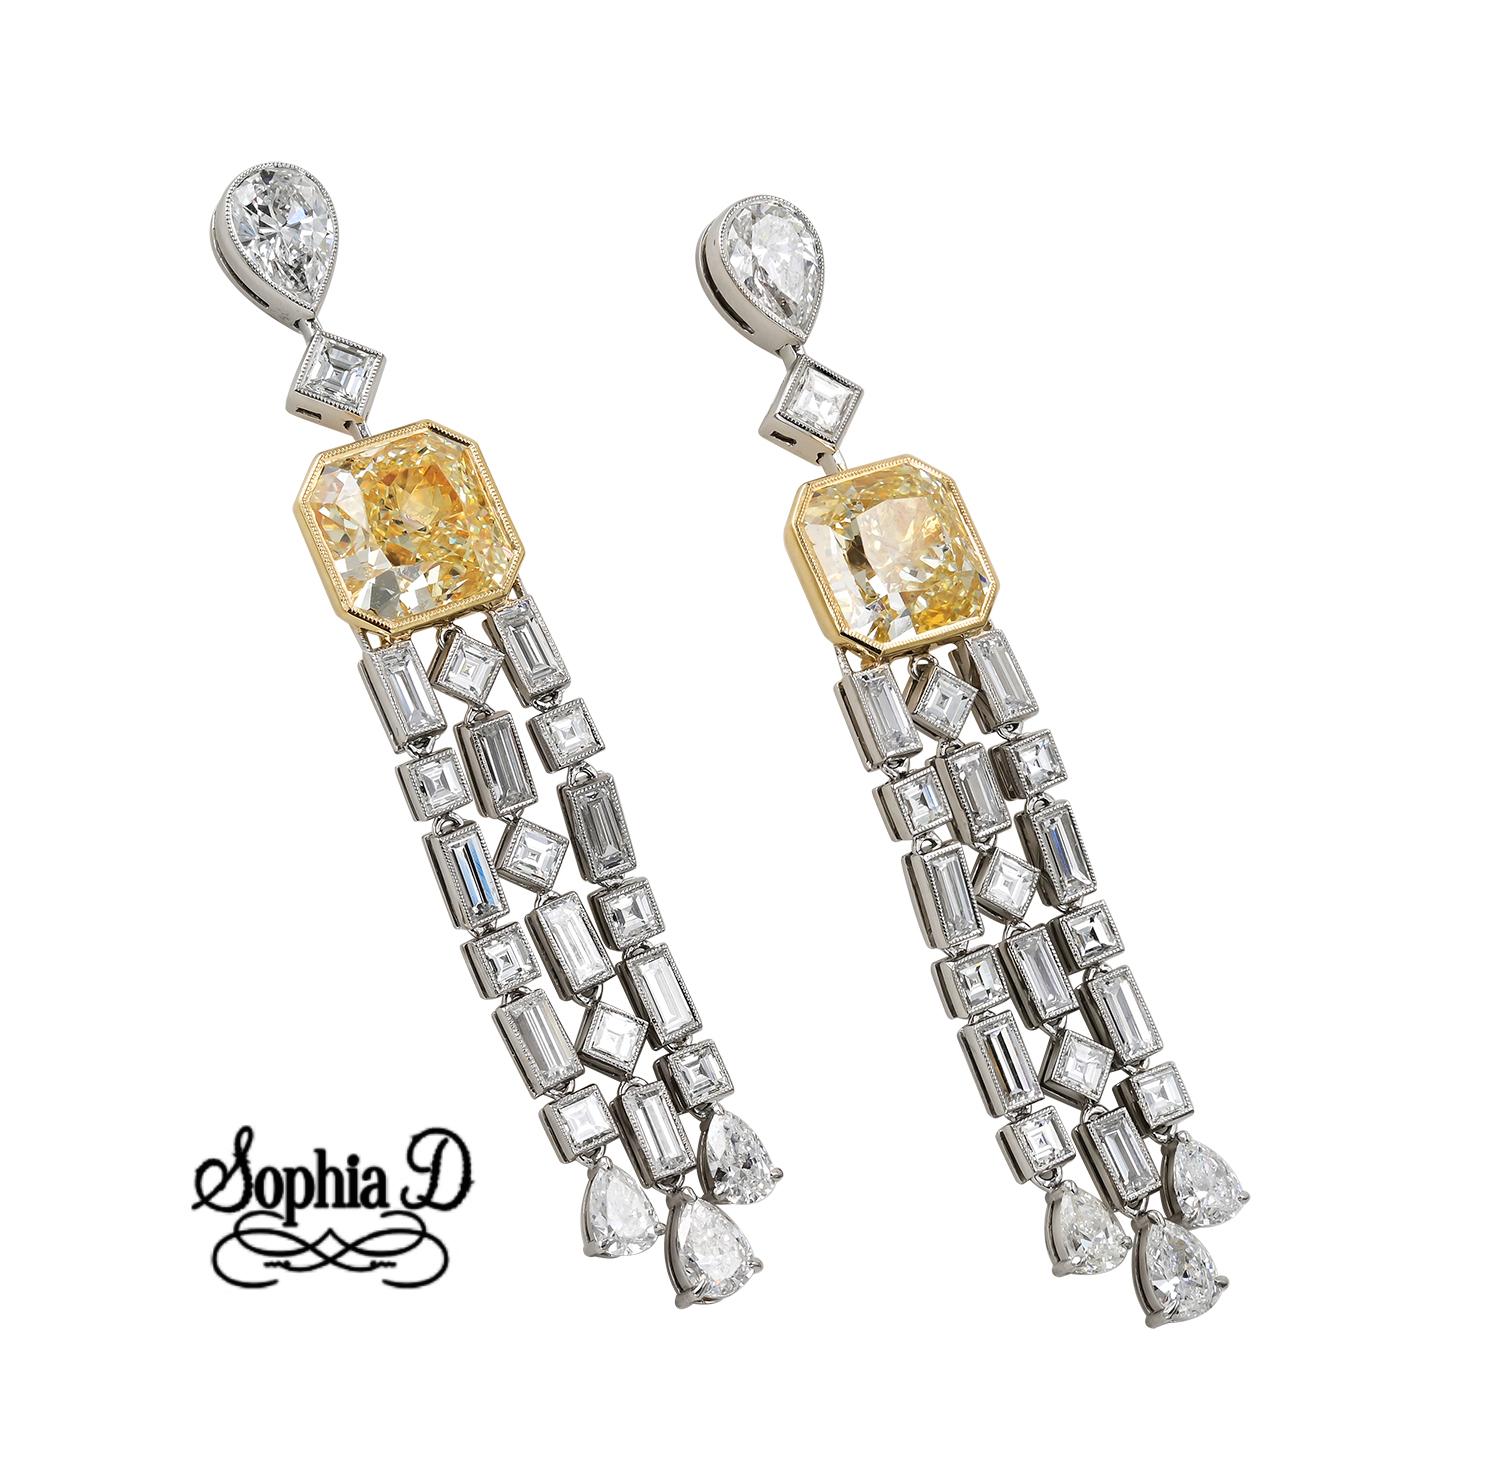 Sophia D hanging clip earrings in platinum setting. The earrings feature yellow diamonds that weigh 3.42 carats and 3.50 carats and white diamonds that totals 5.10 carats. 

Sophia D by Joseph Dardashti LTD has been known worldwide for 35 years and